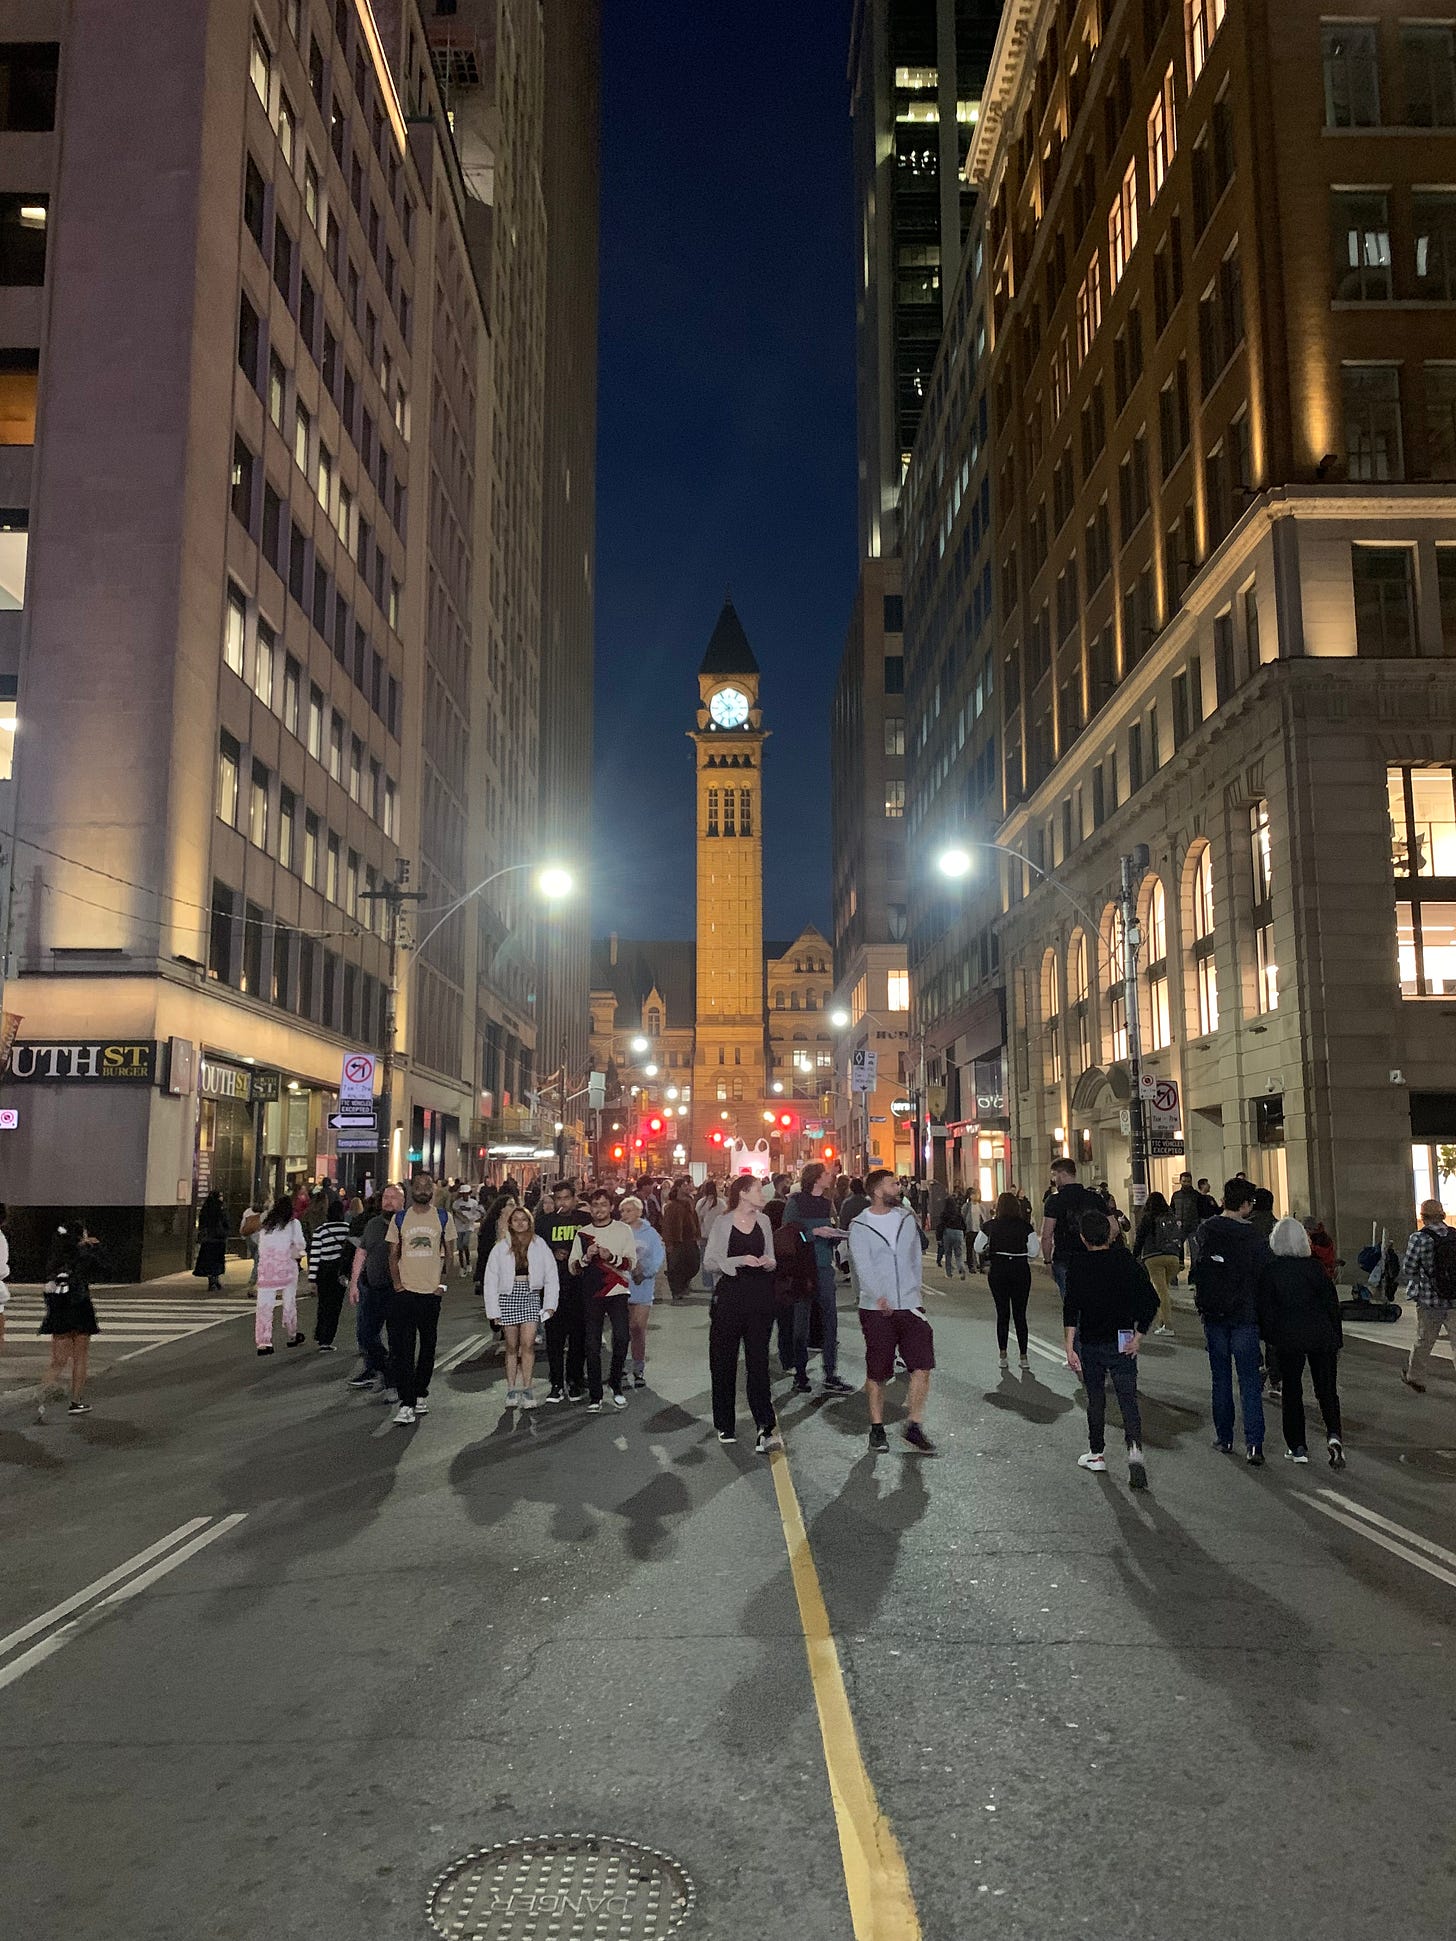 A long street with a clock tower glowing in the background at the end, and a crowd walking in the street.